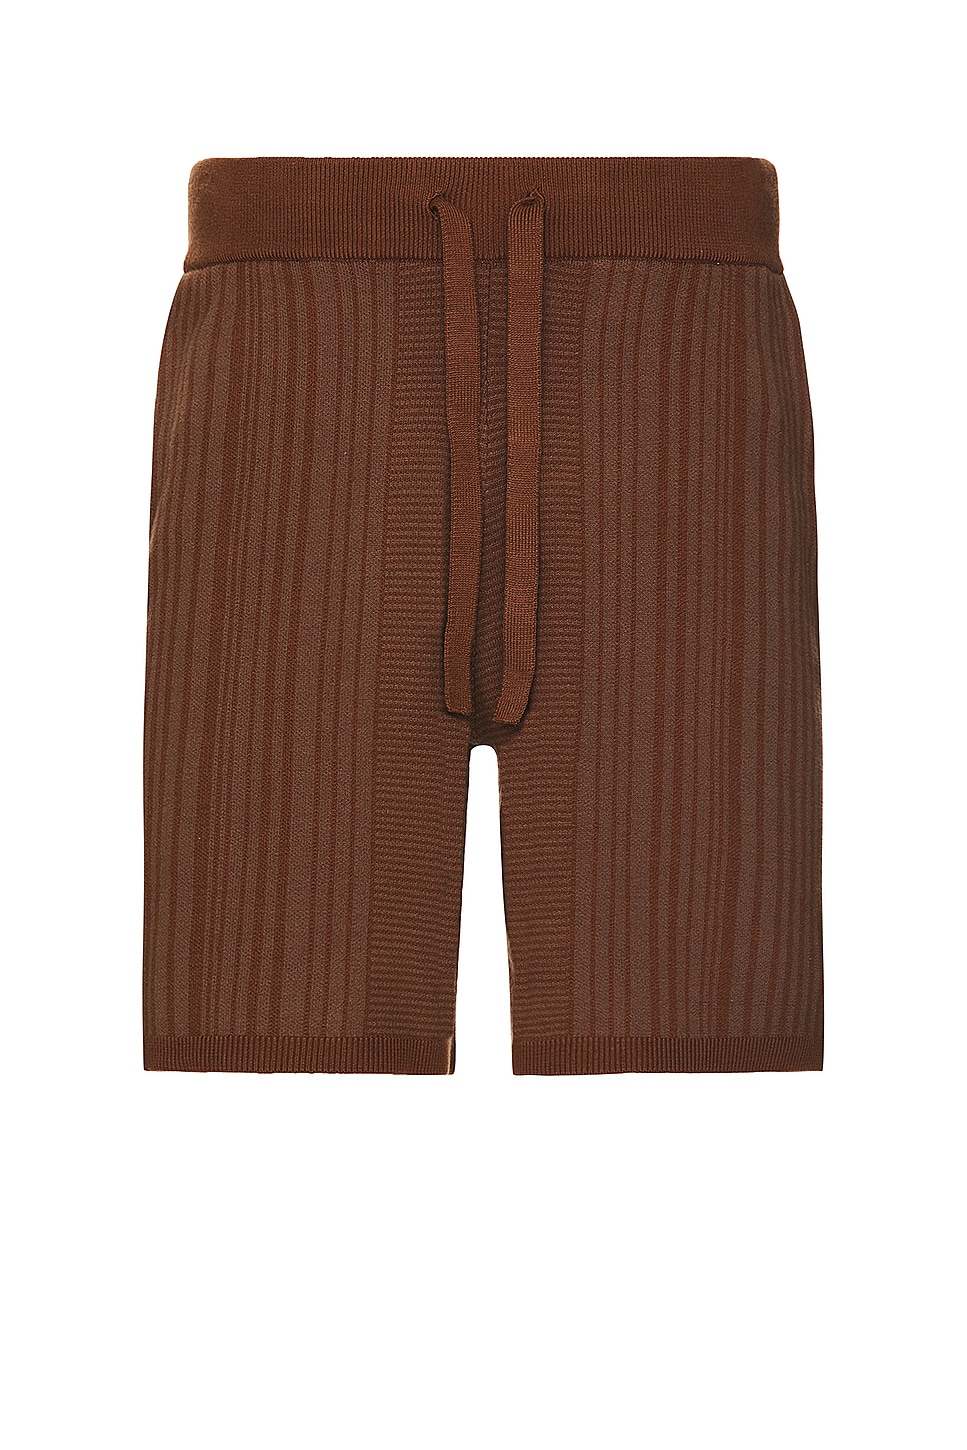 Image 1 of WAO Fully Knitted Pattern Short in Brown & Taupe